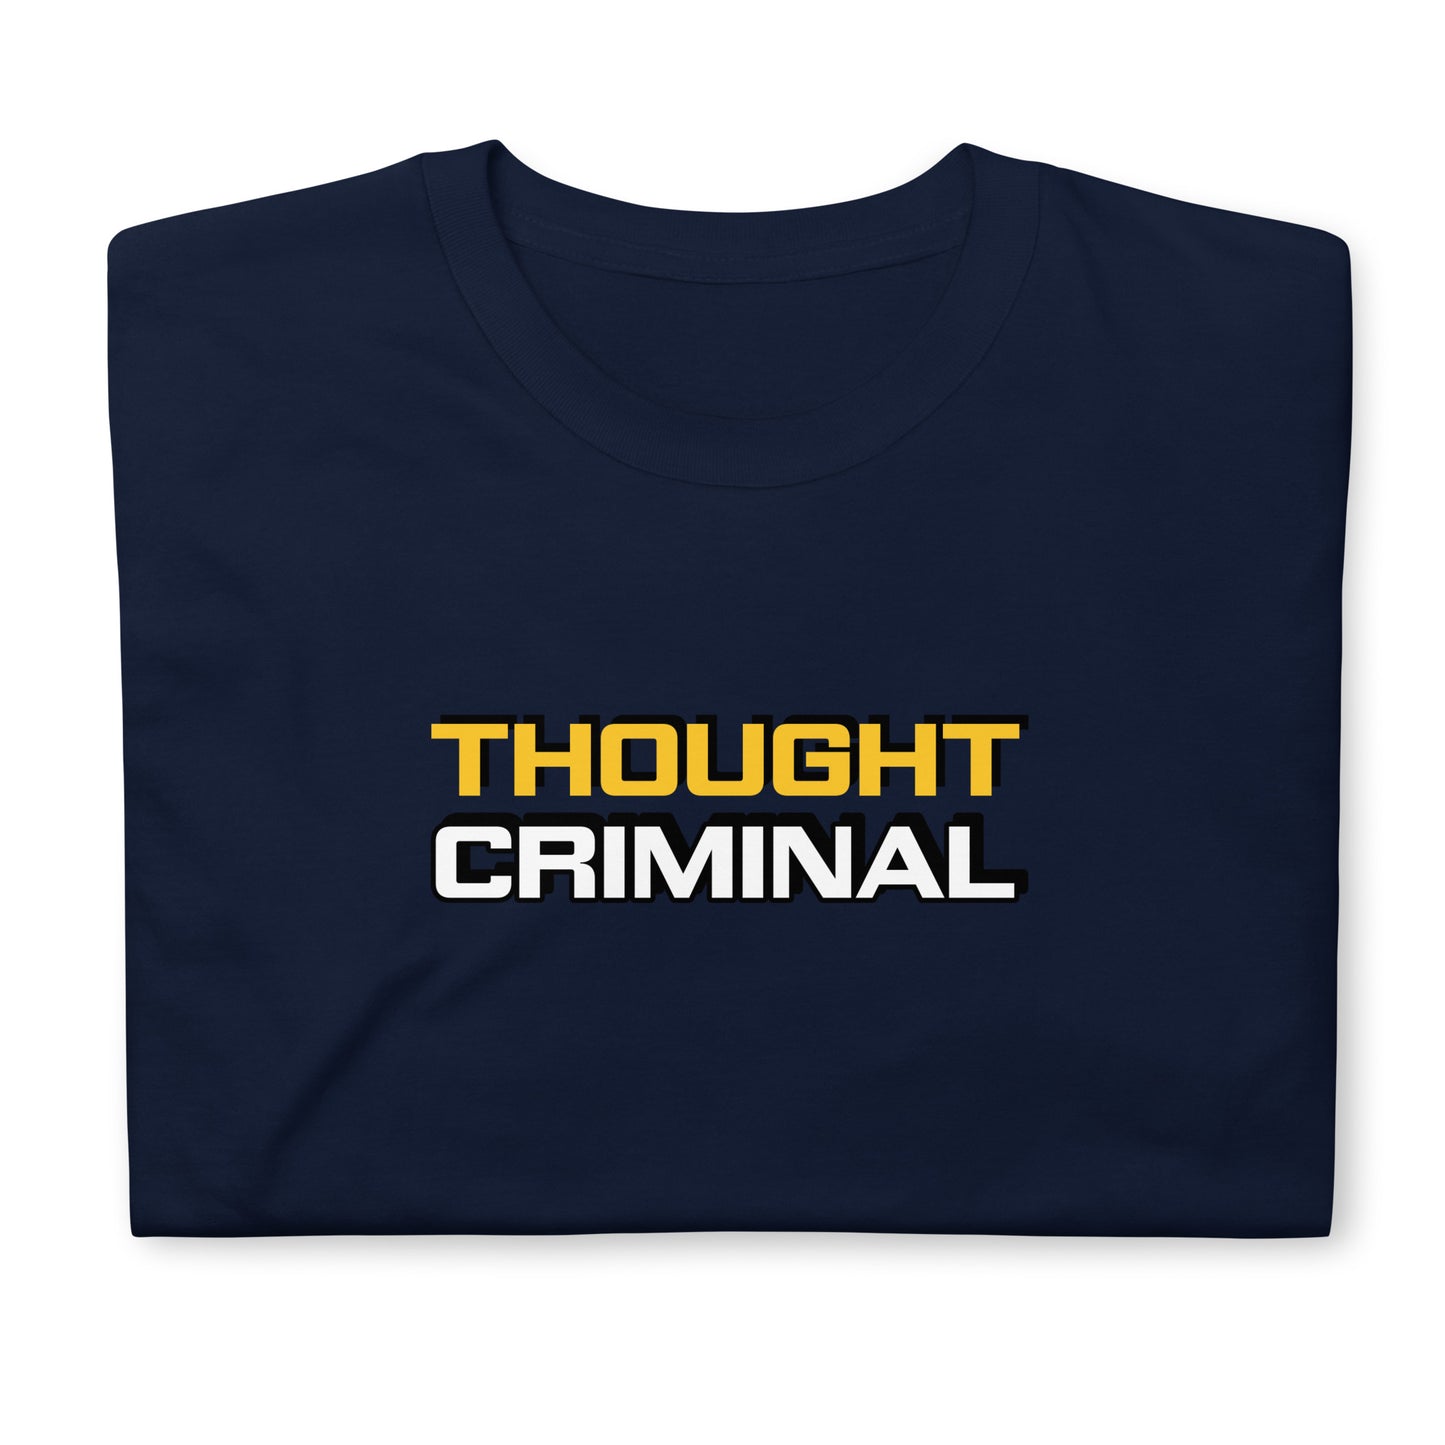 Thought Criminal T-Shirt: Wear Your Rebellion